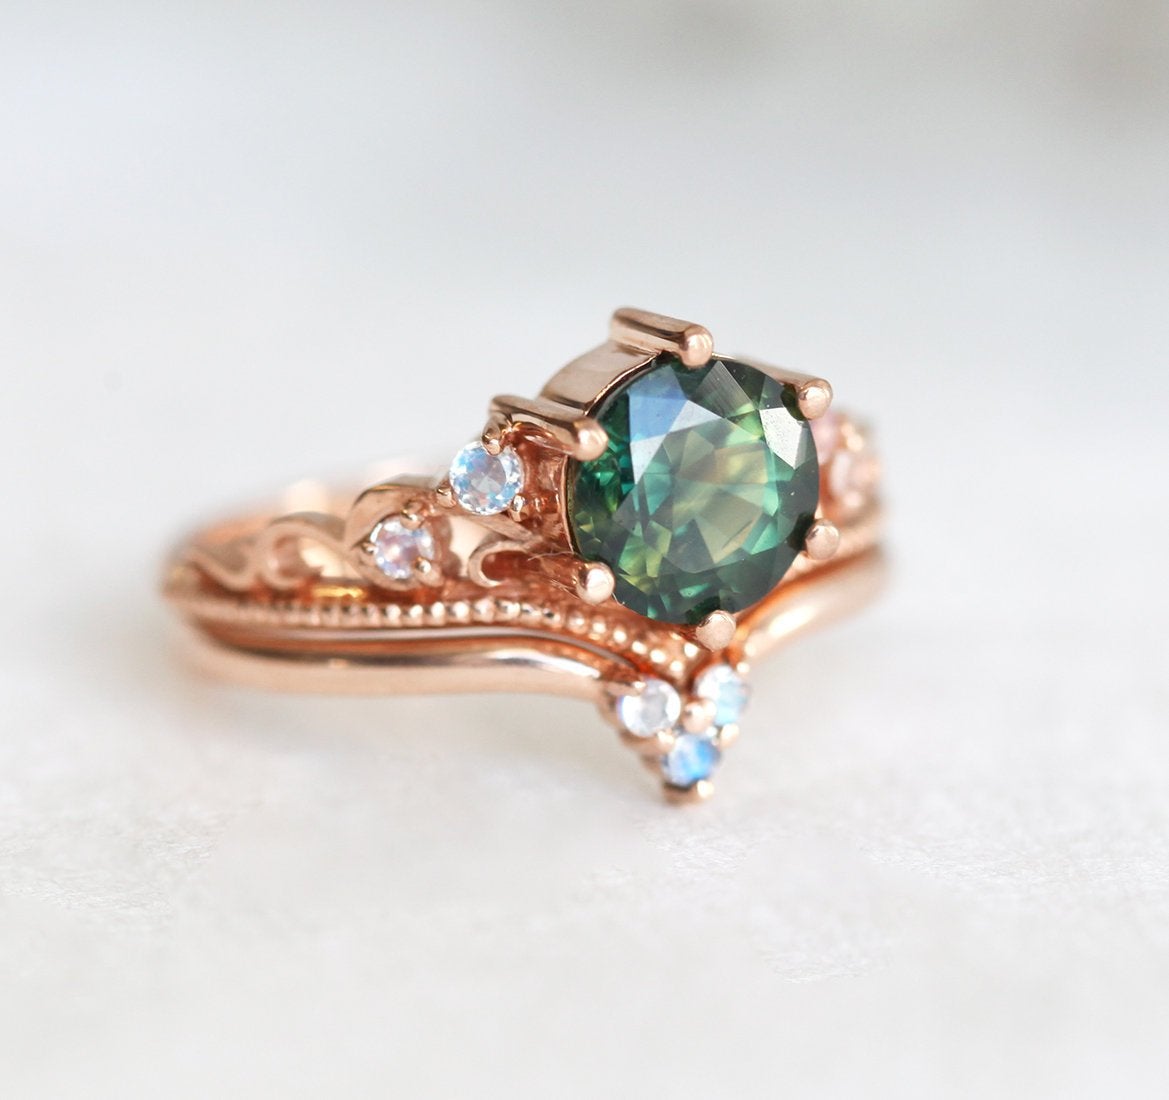 Round green vintage sapphire ring with side moonstones